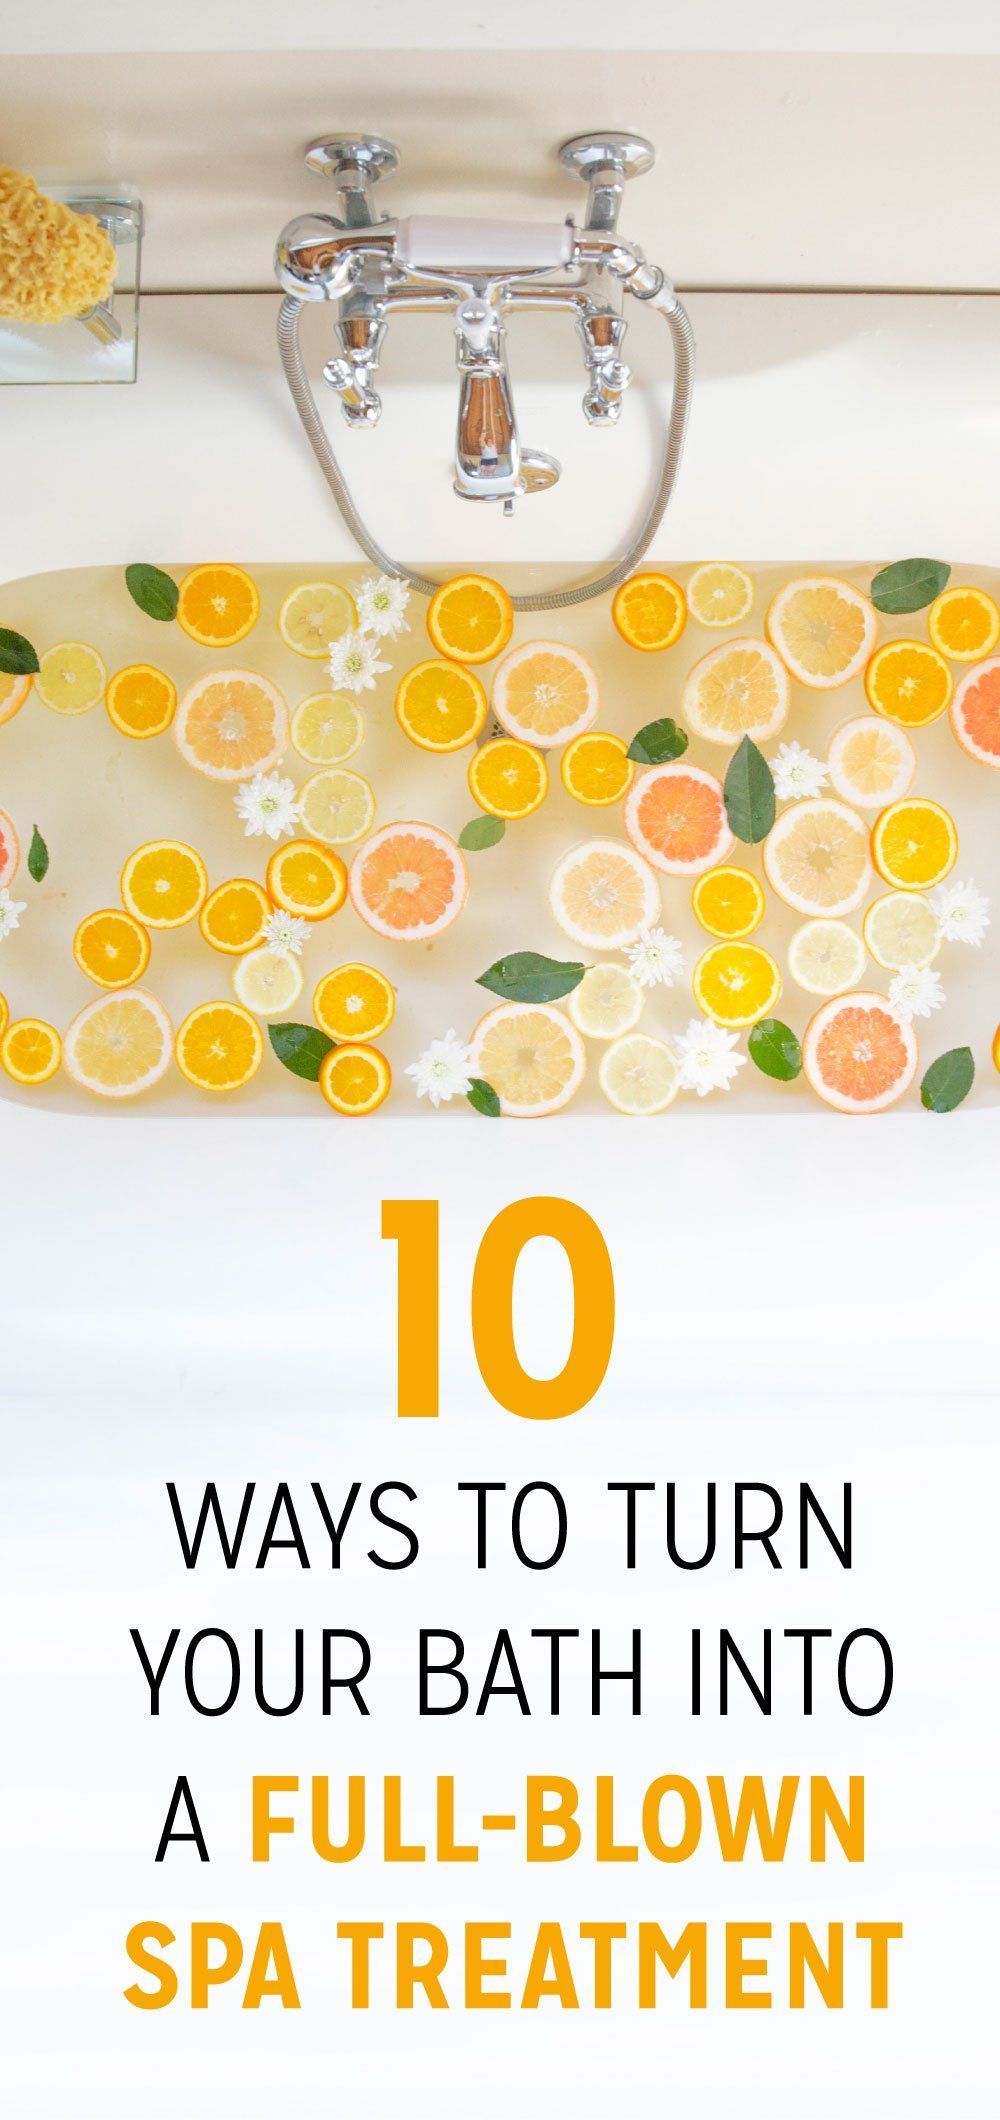 10 Ways to Turn Your Bath Into a Full-Blown Spa Treatment - 10 Ways to Turn Your Bath Into a Full-Blown Spa Treatment -   17 beauty Treatments spa ideas